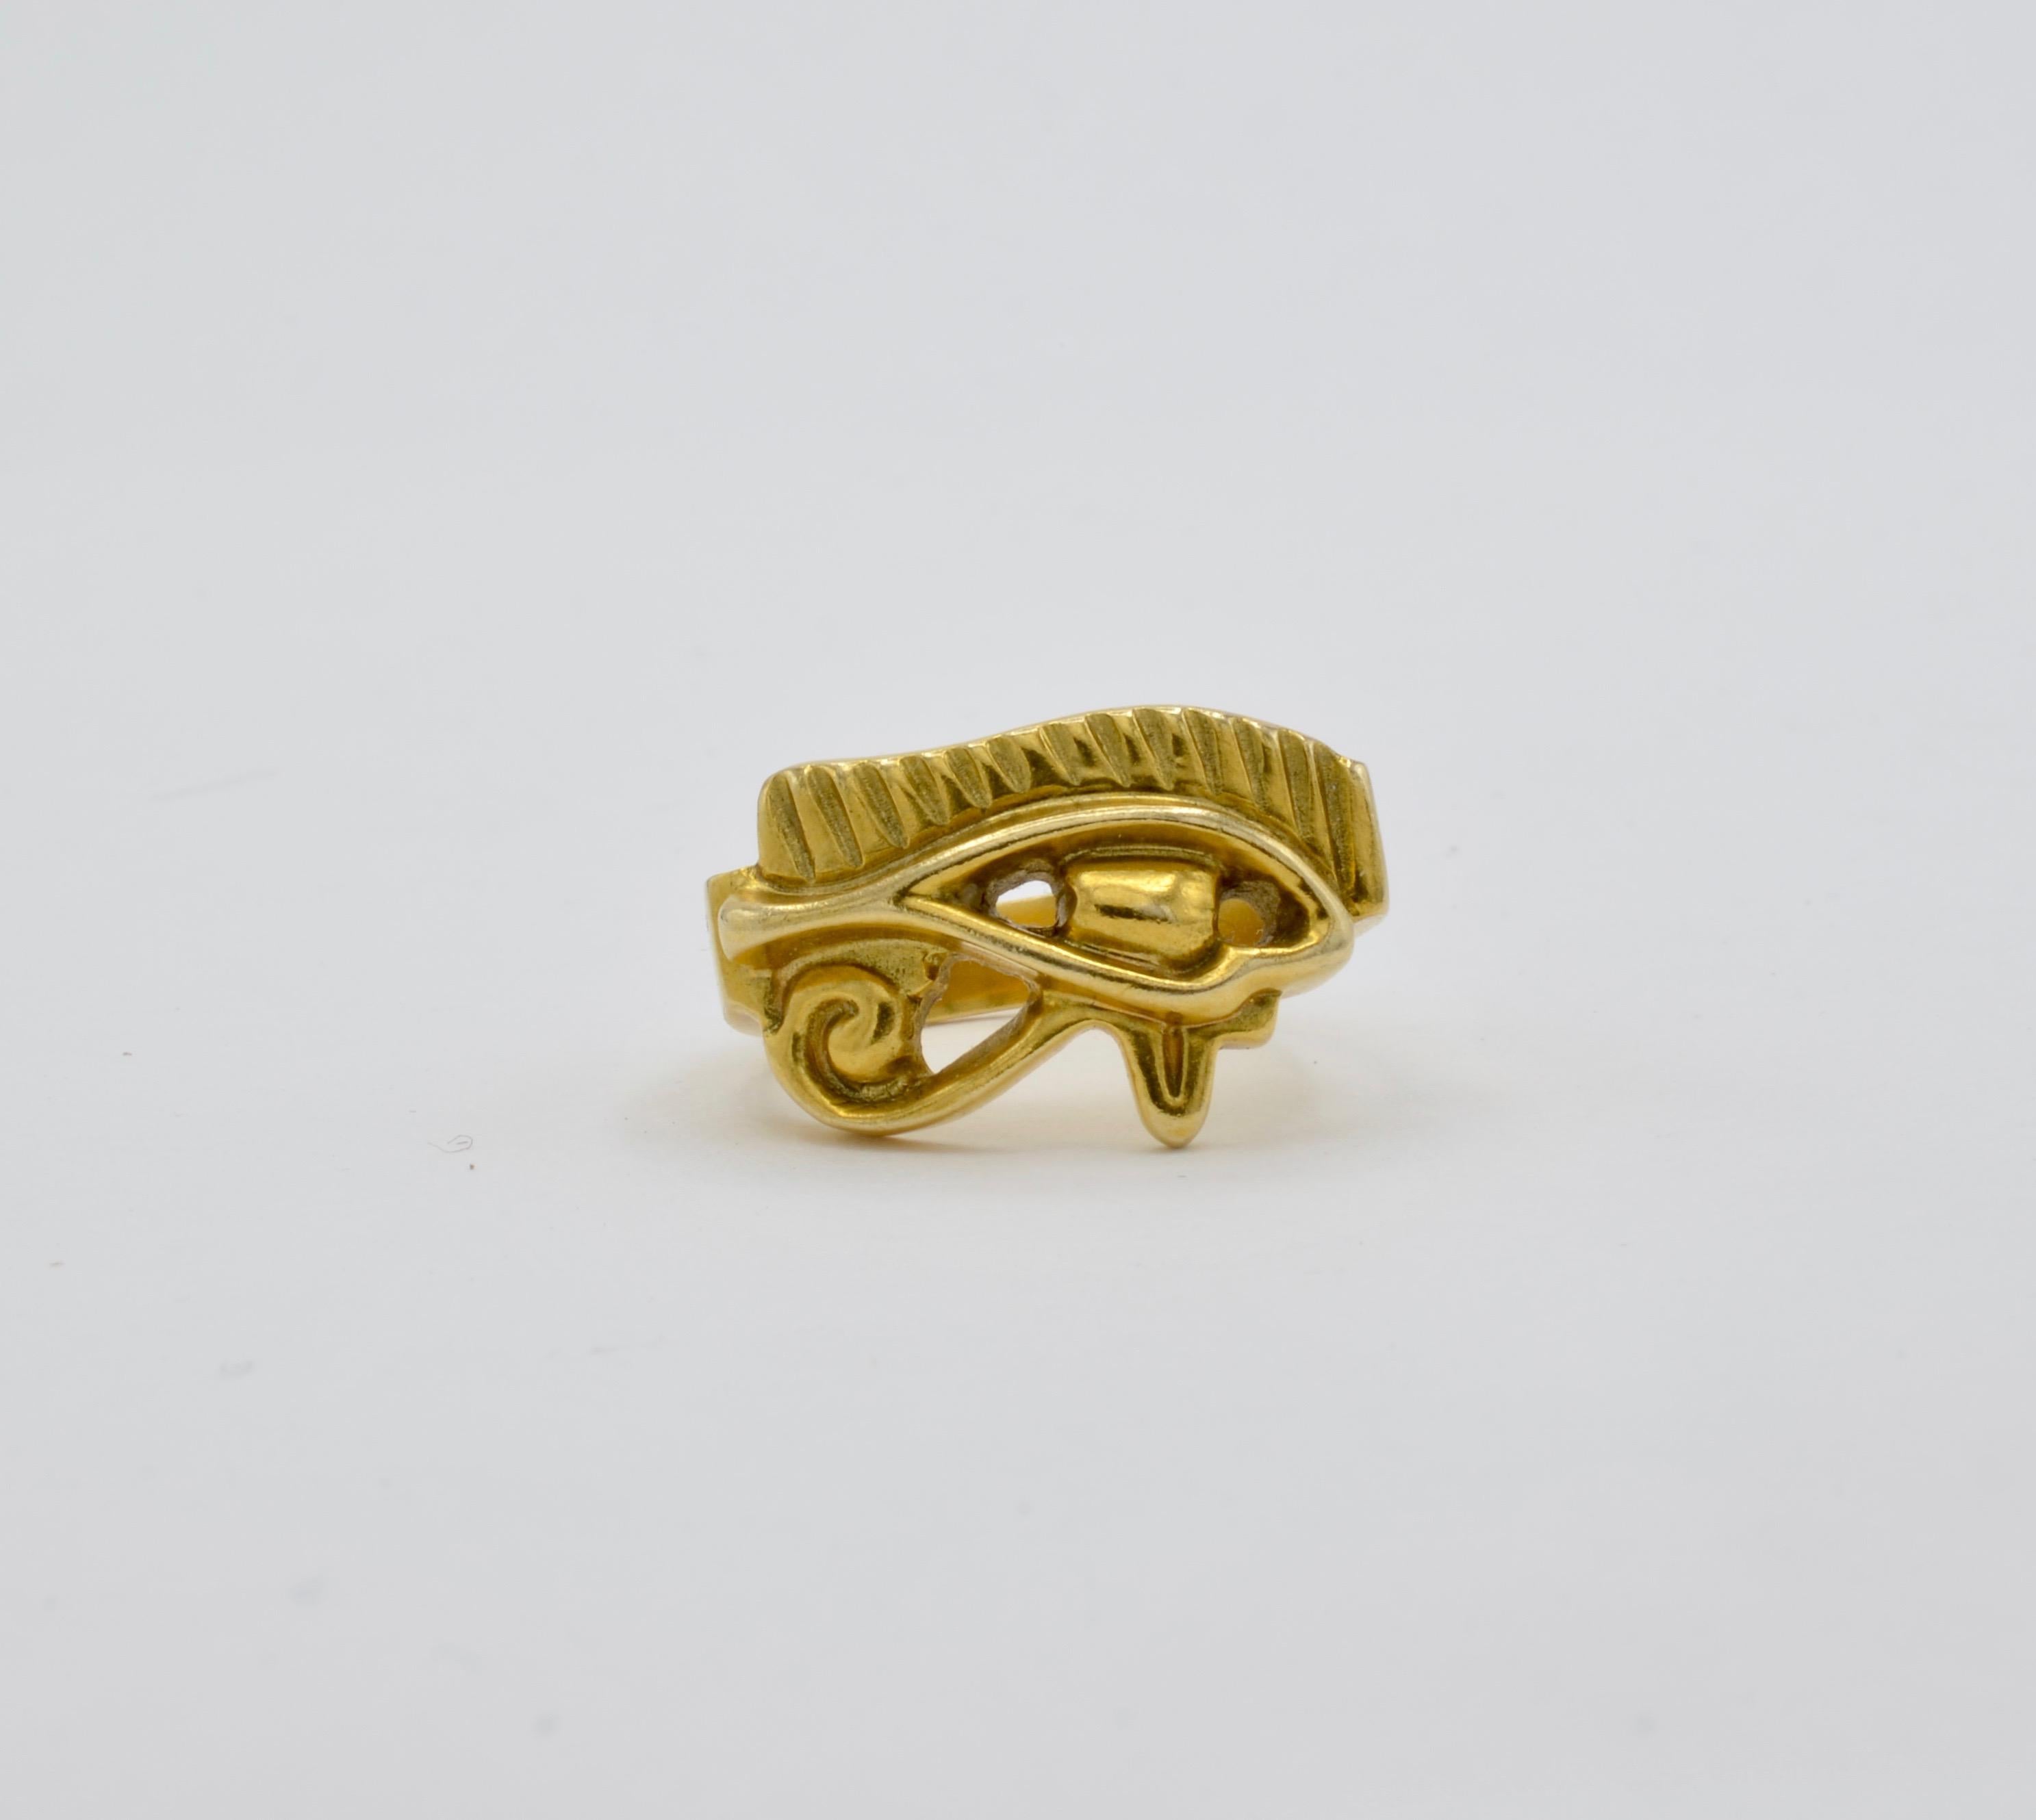 This magical Egyptian Eye of Horus ring is 14k gold and reedition for a museum. Horus was an ancient a sky god whose eyes were said to be the sun and the moon. This is a known symbol of protection, royal power, and good health.
Size 6.25
Marks